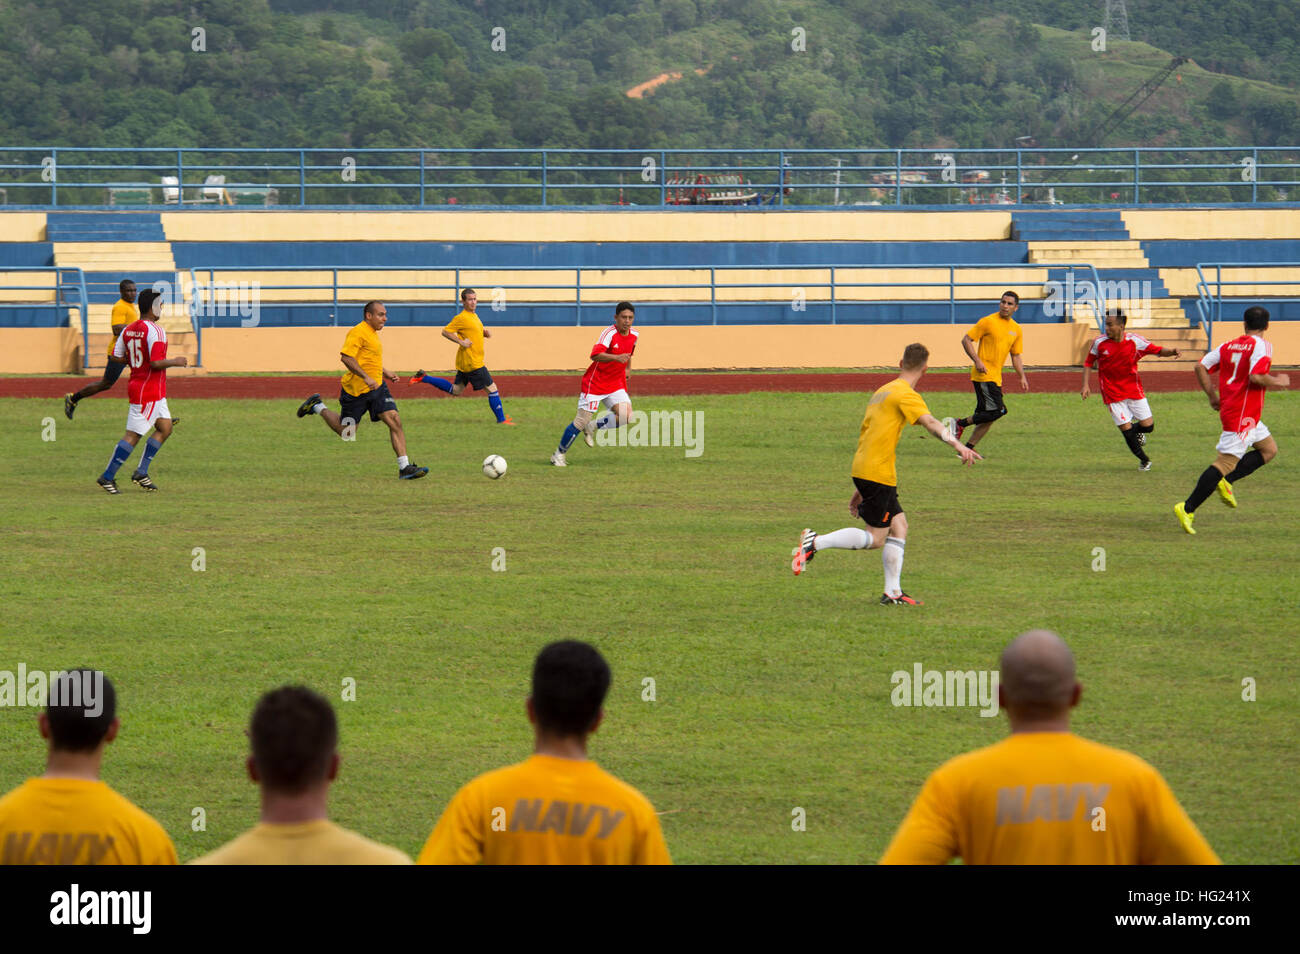 Sailors and Marines assigned to the dock landing ship USS Comstock (LSD 45) and 11th Marine Expeditionary Unit (MEU) play a game of soccer against the Royal Malaysian Navy during a port visit. Comstock, part of the Makin Island Amphibious Ready Group, is on a deployment with the 11th MEU to promote peace and freedom of the seas by providing security and stability in the U.S. 7th Fleet area of operations. (U.S. Navy photo by Mass Communication Specialist 3rd Class Lenny LaCrosse/Released) USS Comstock Sailors, 11th MEU Marines play soccer with Royal Malaysian Navy 150127-N-CU914-425 Stock Photo